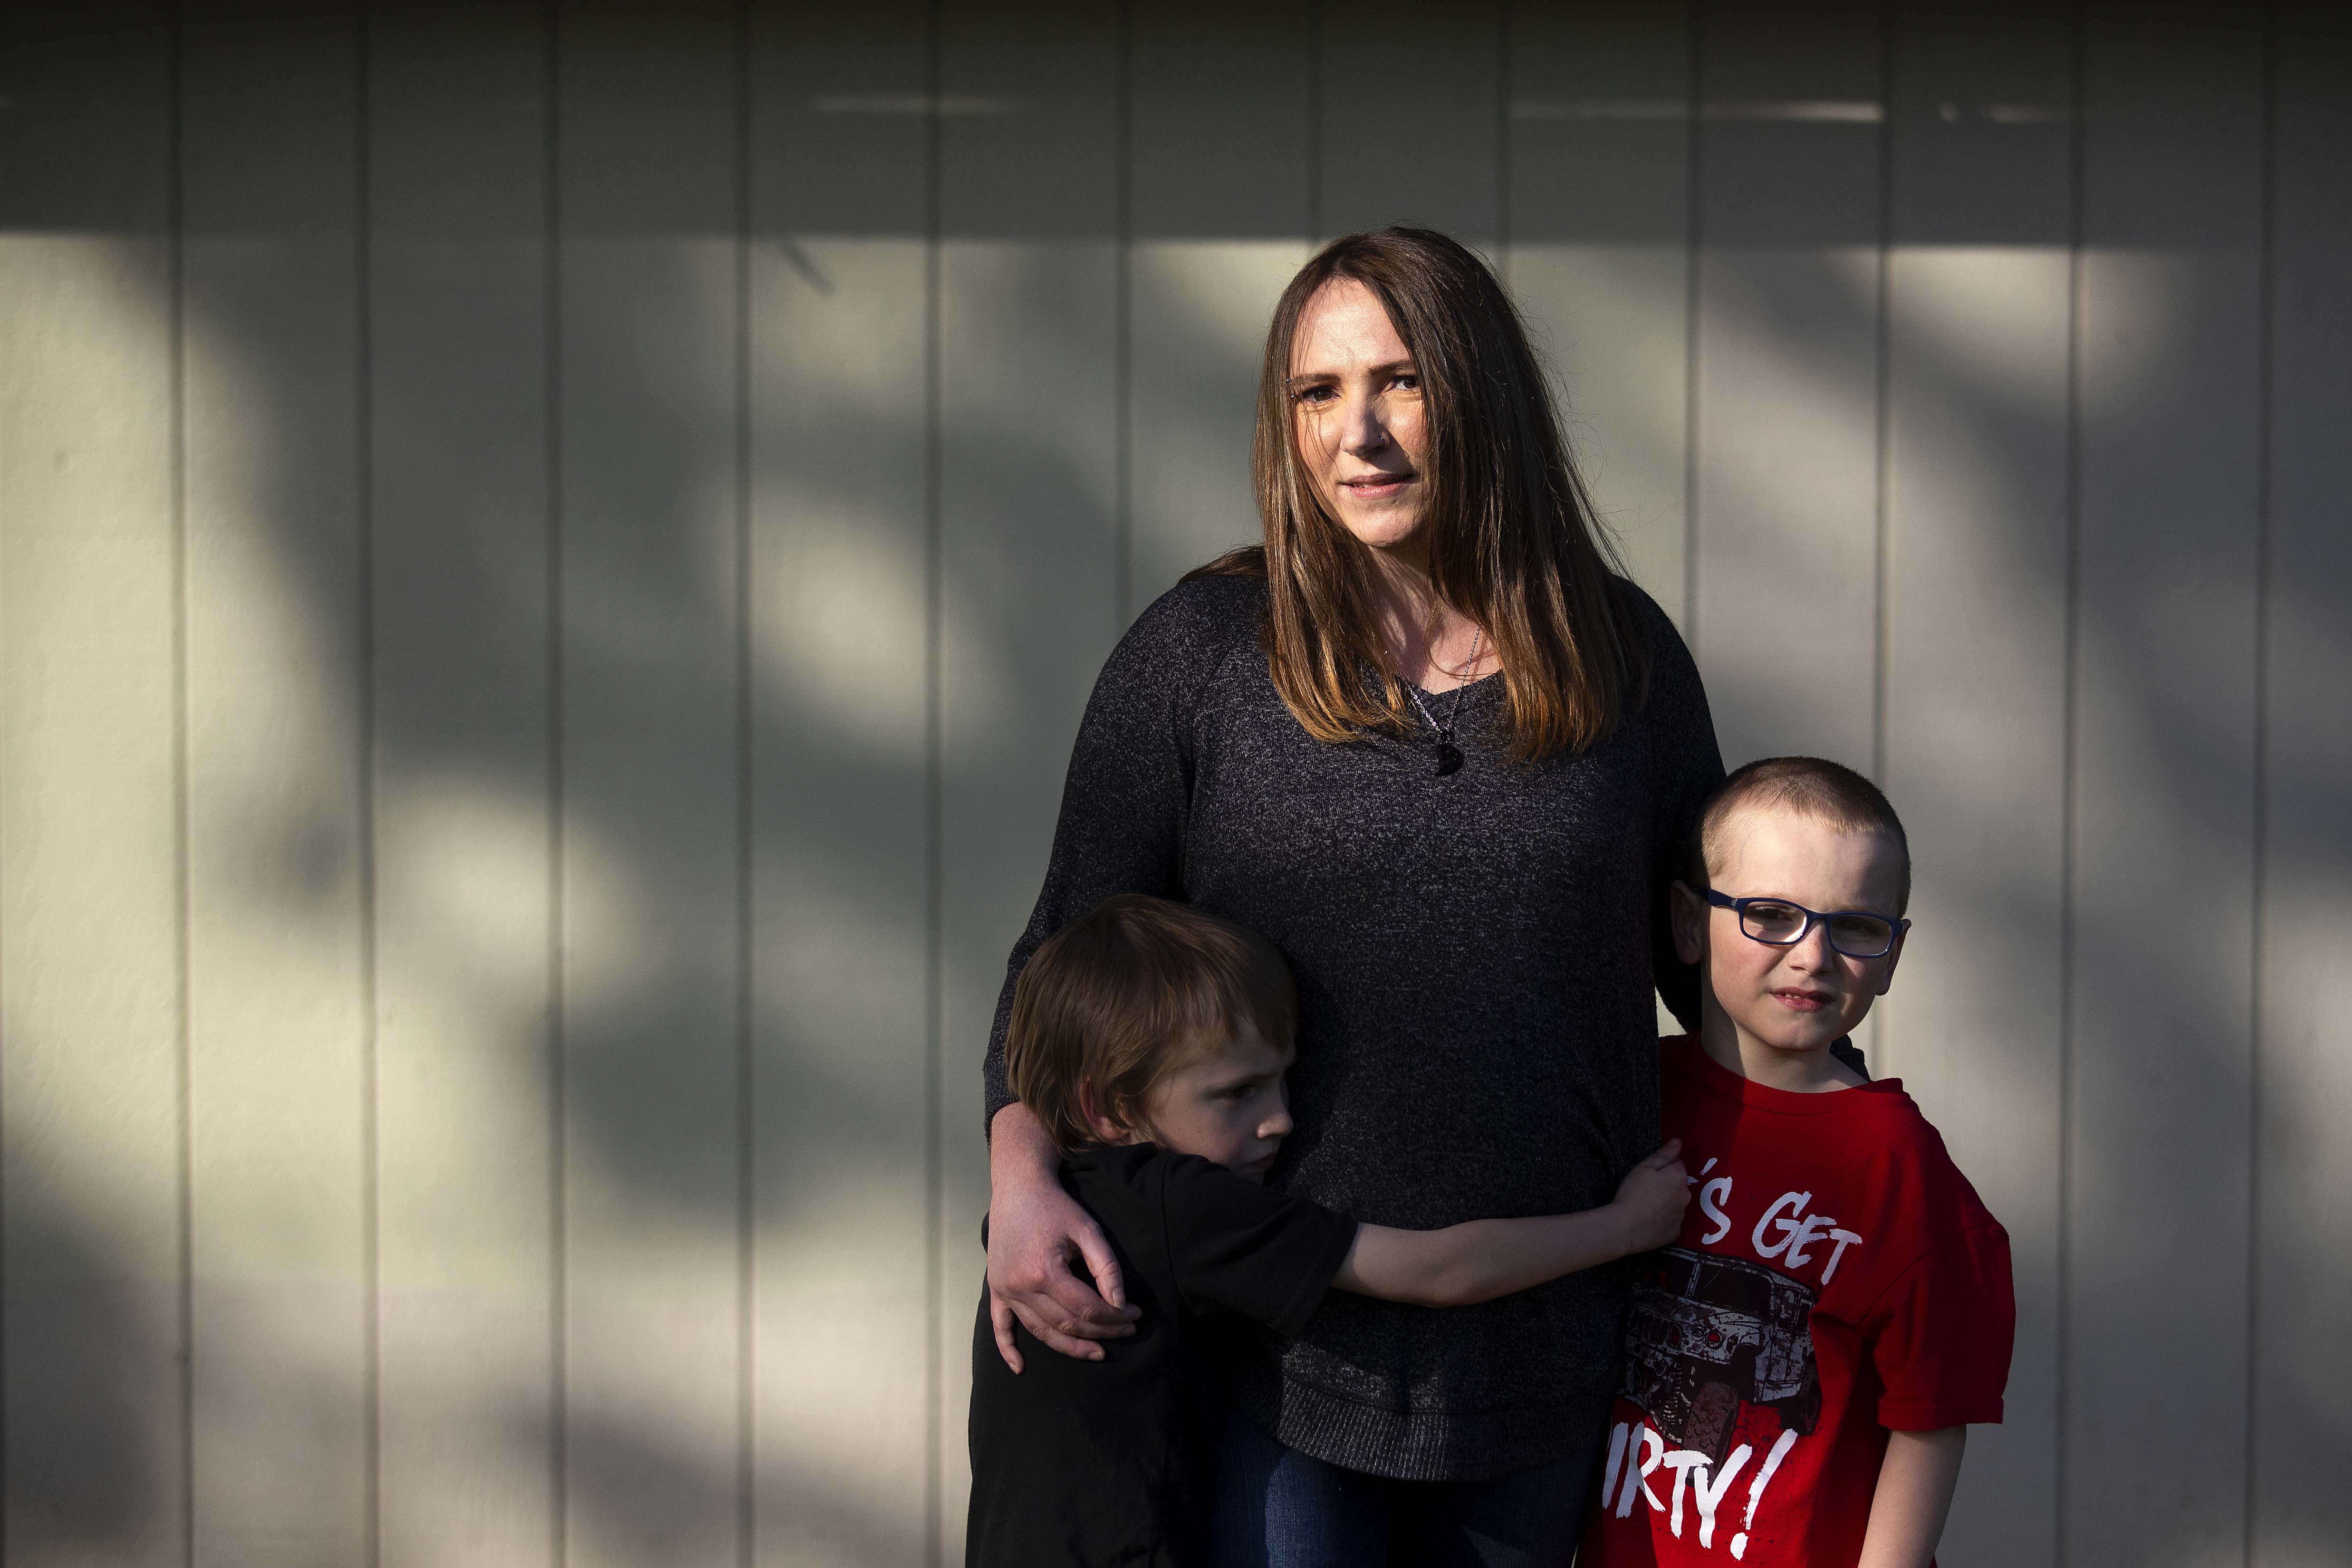 Amanda Schroeder, 31, stands with her two sons Jayden, 6, left, and Jeremiah, 8, on Tuesday, April 25, 2023, at Erickson Park in Port Angeles. KUOW Photo/Megan Farmer.